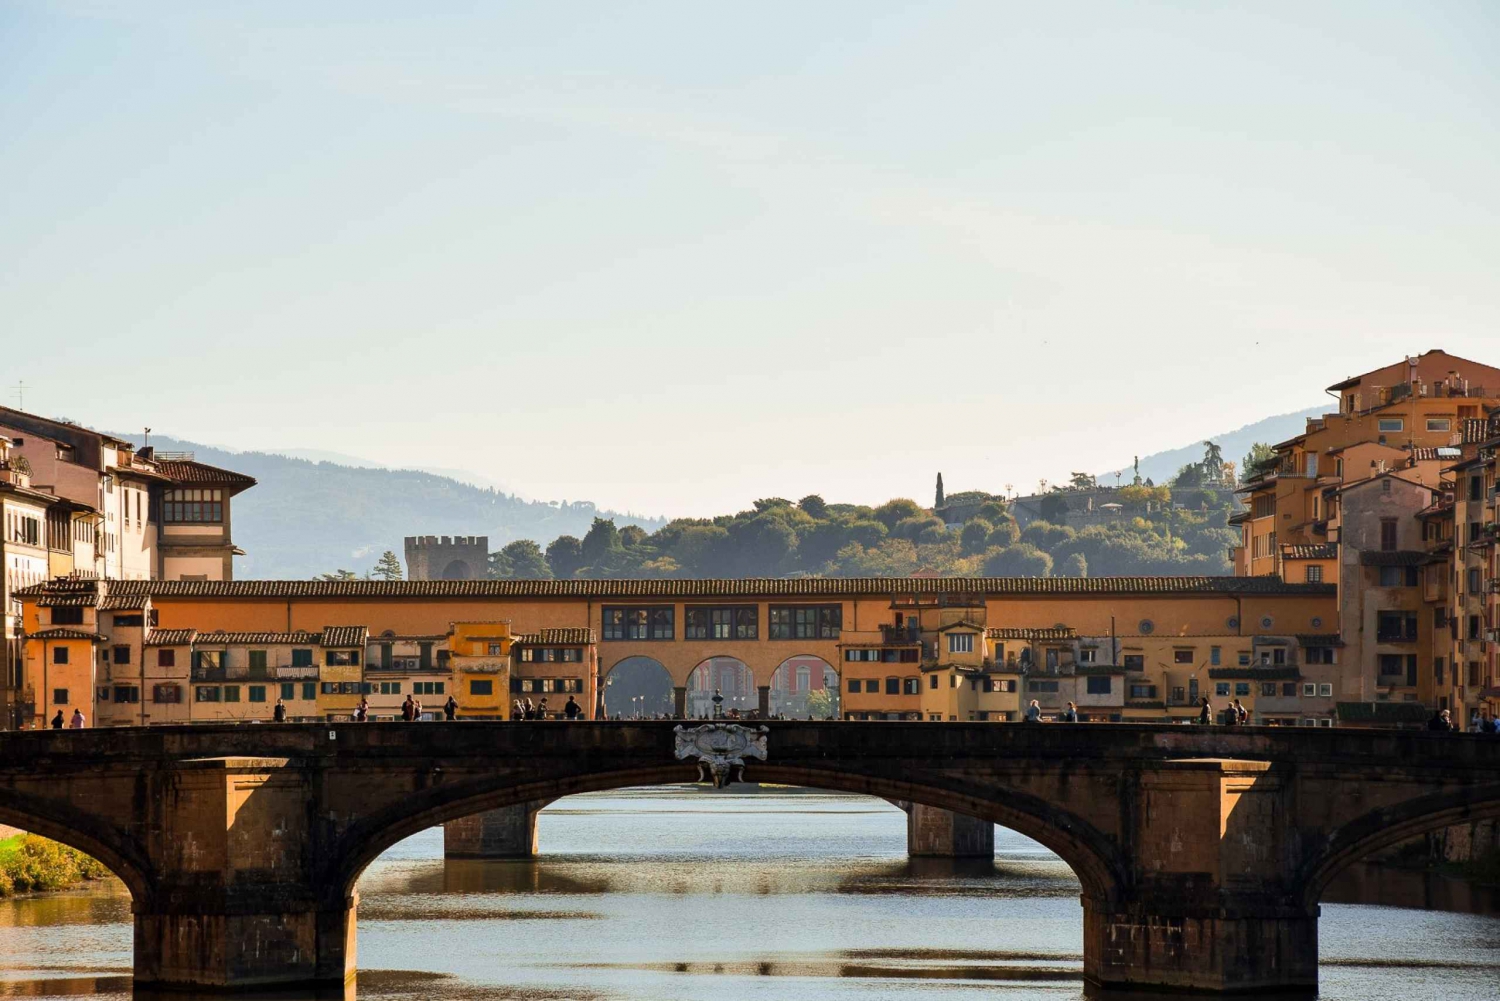 Florence: Accademia and Uffizi Gallery Guided Tour